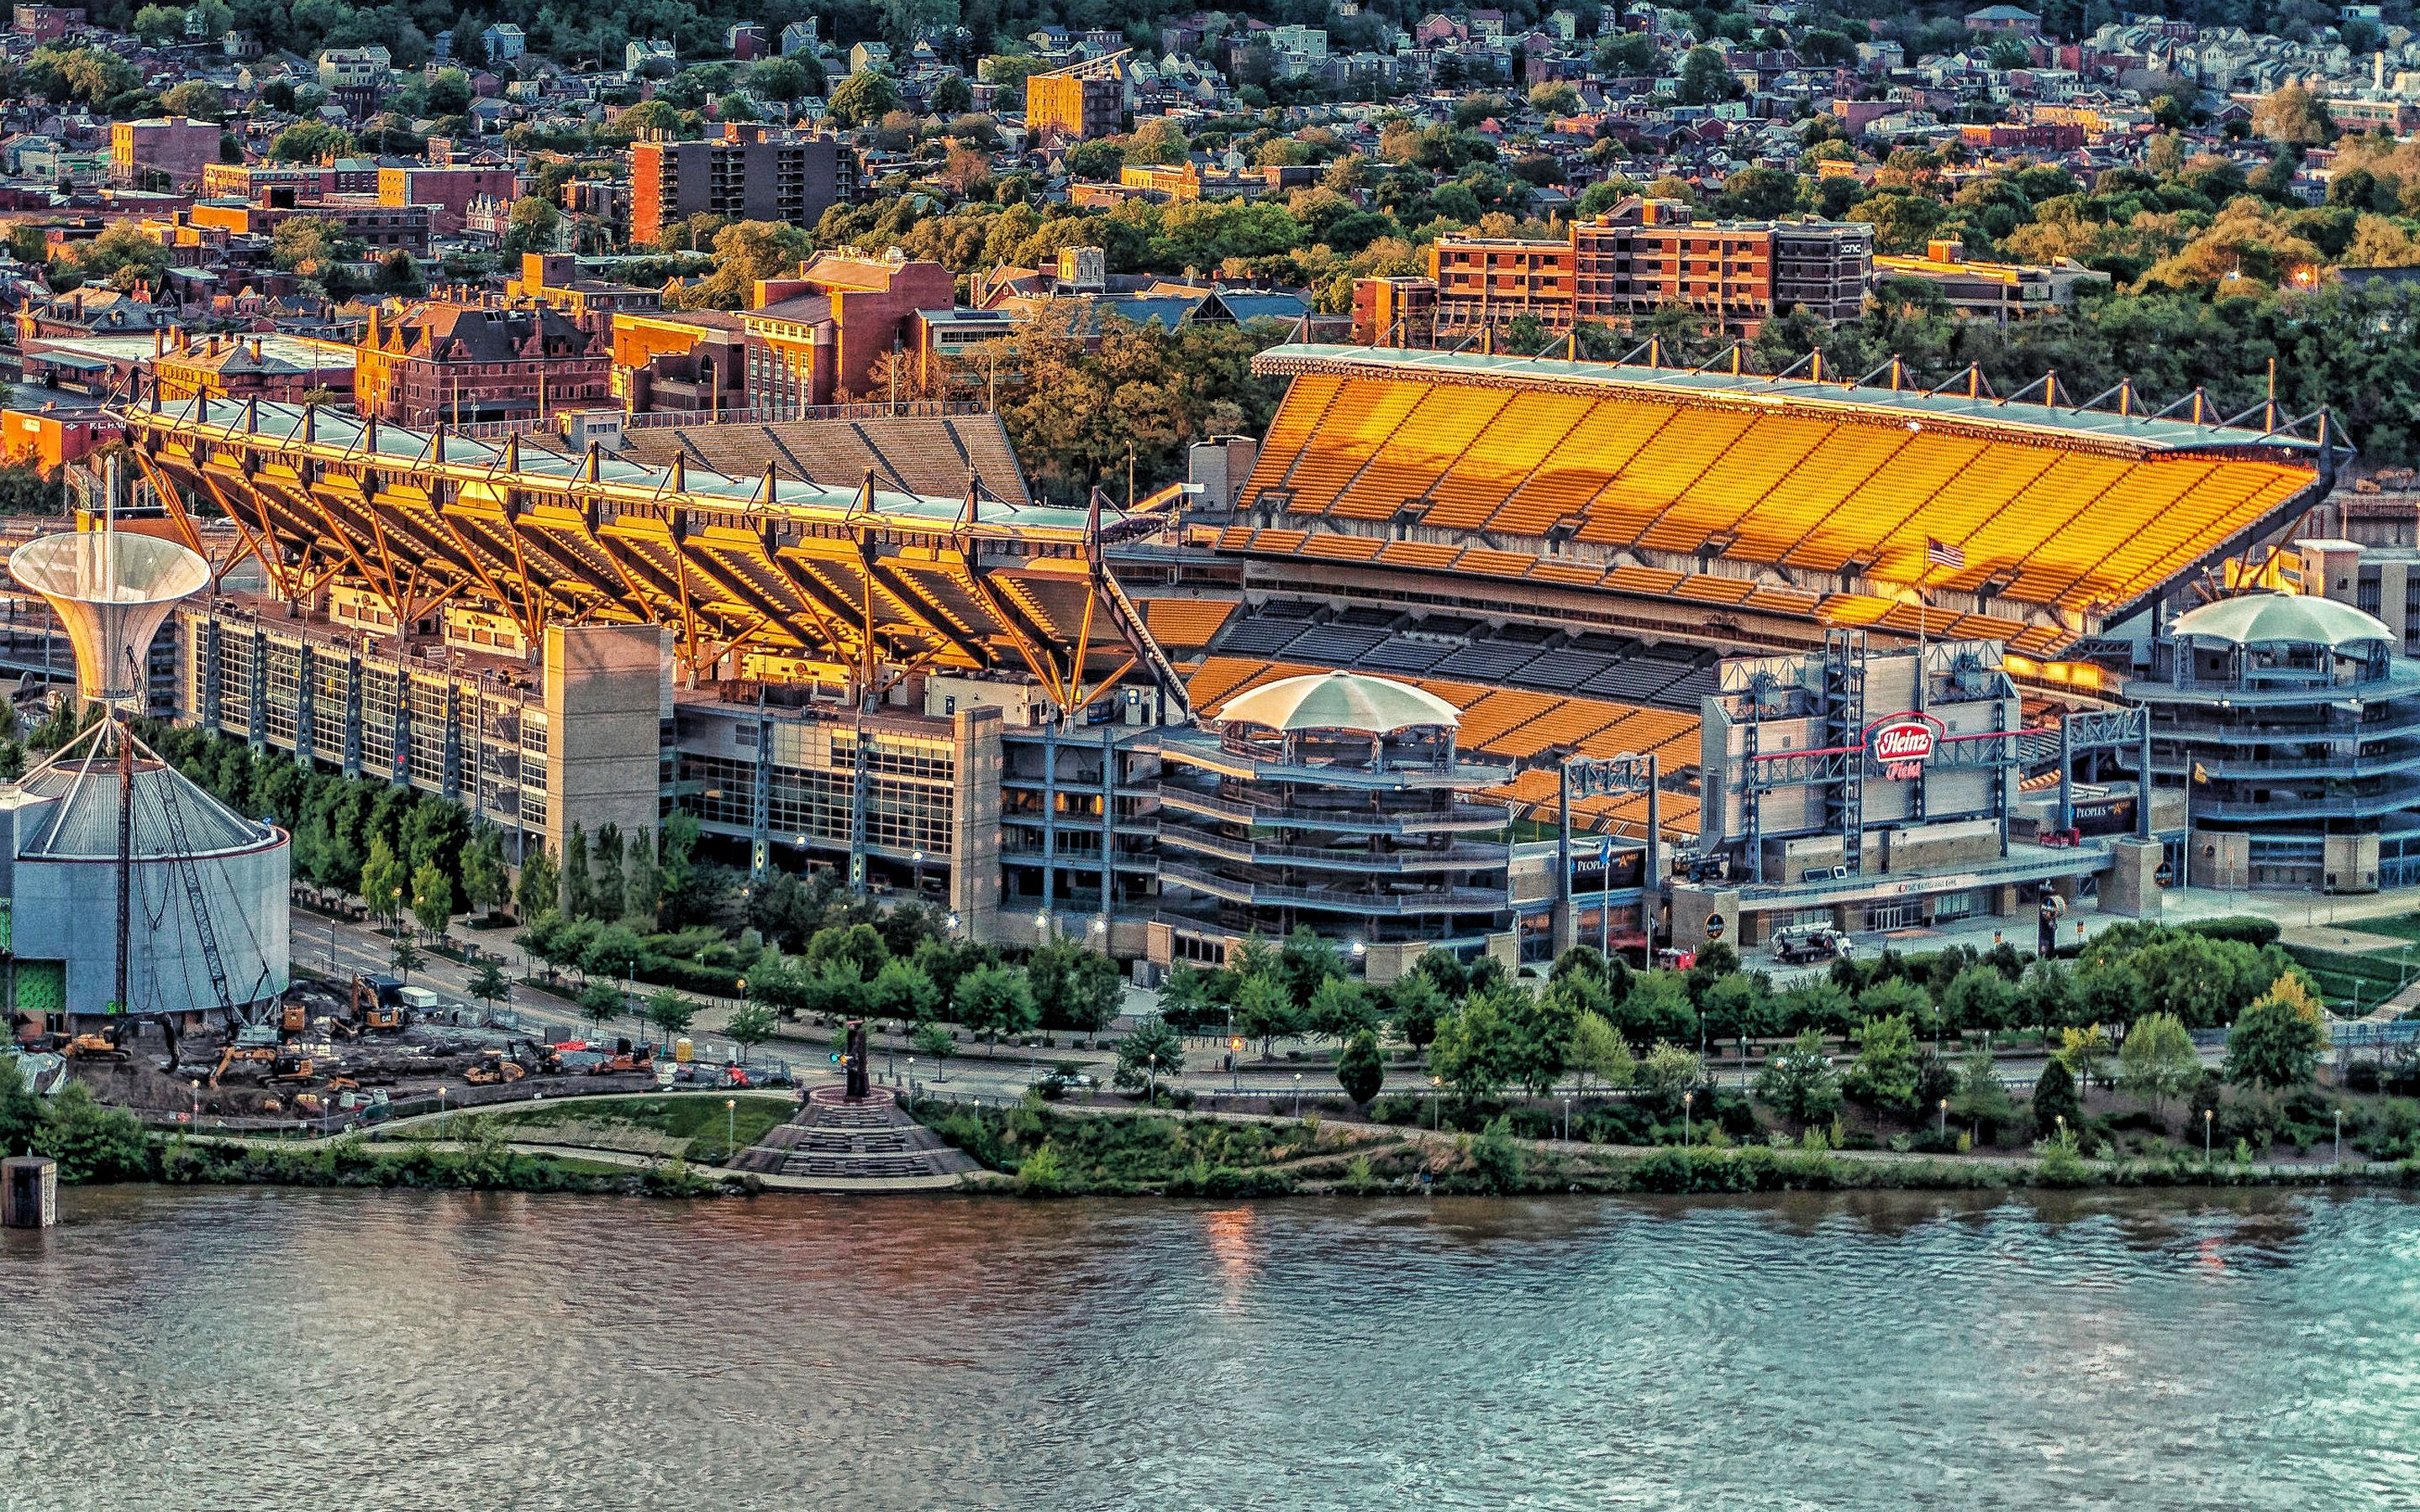 Download wallpaper Heinz Field, Pittsburgh Steelers Stadium, Pittsburgh, USA, American Football Stadium, NFL for desktop with resolution 2880x1800. High Quality HD picture wallpaper